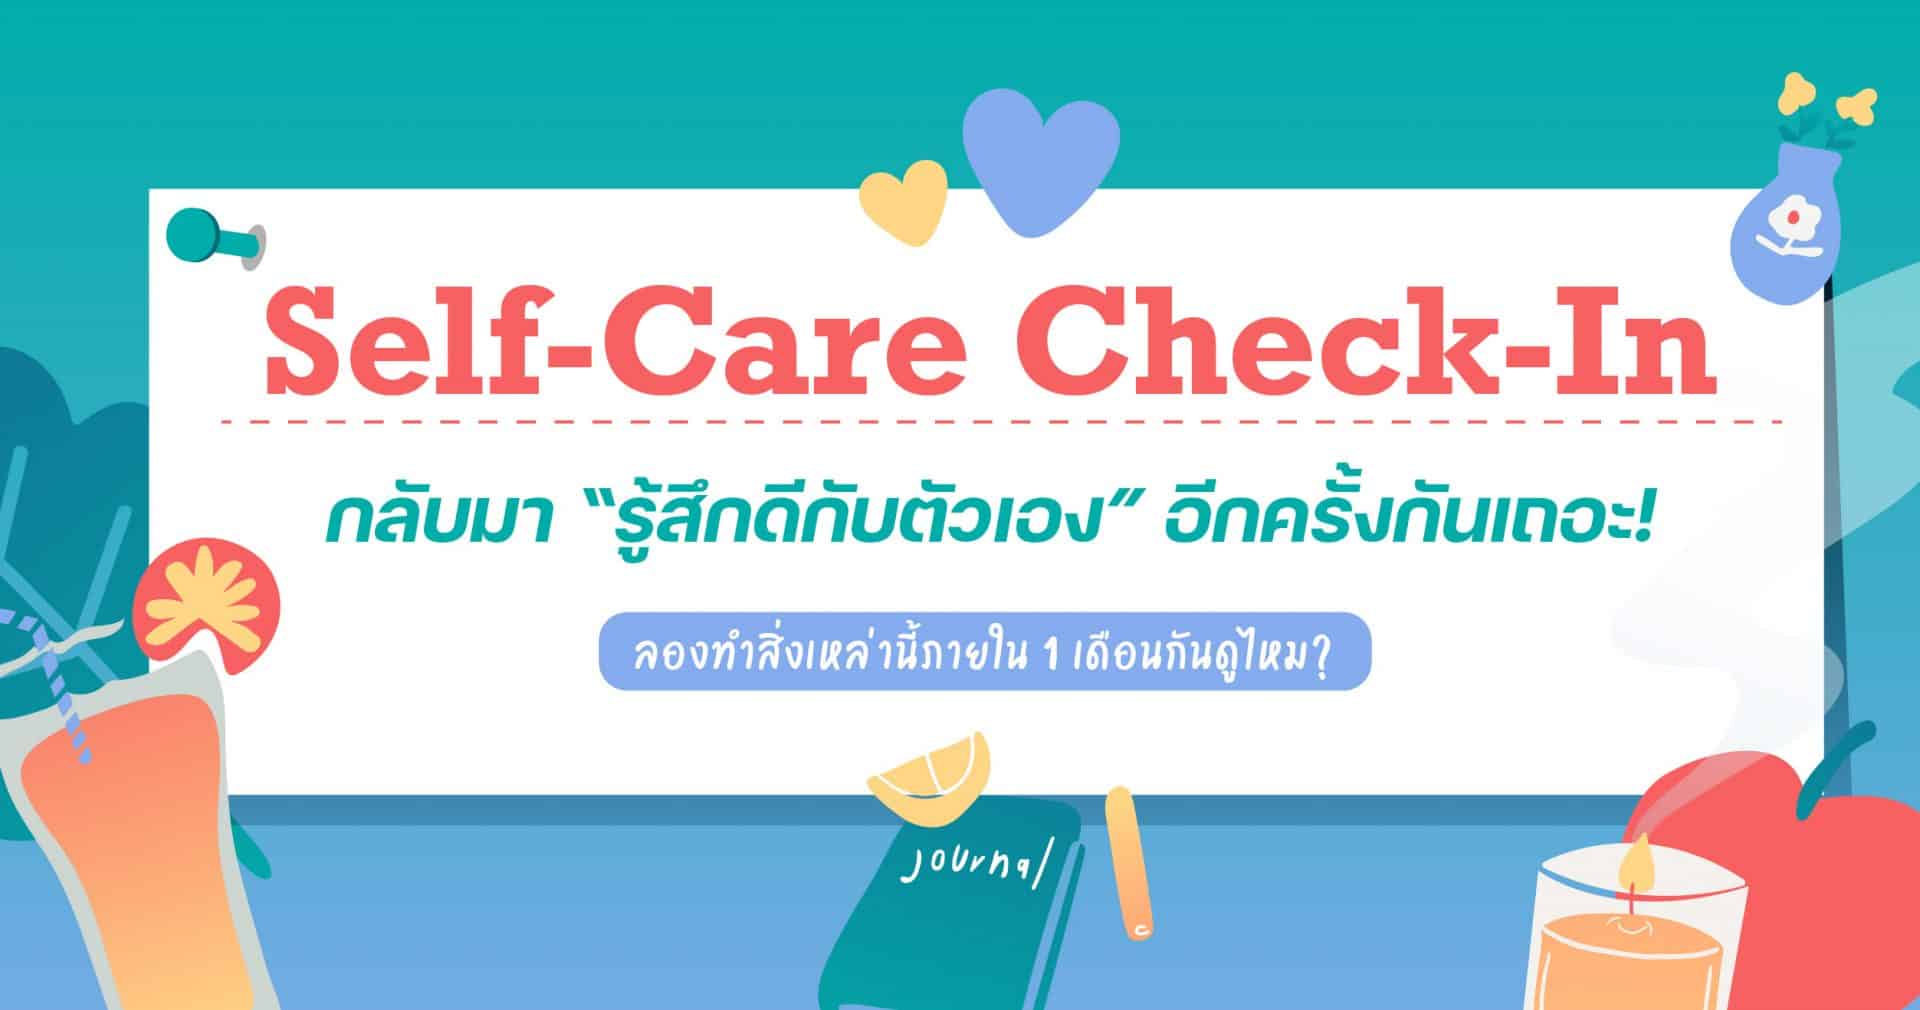 Self-Care Check-In by Mission to the Moon